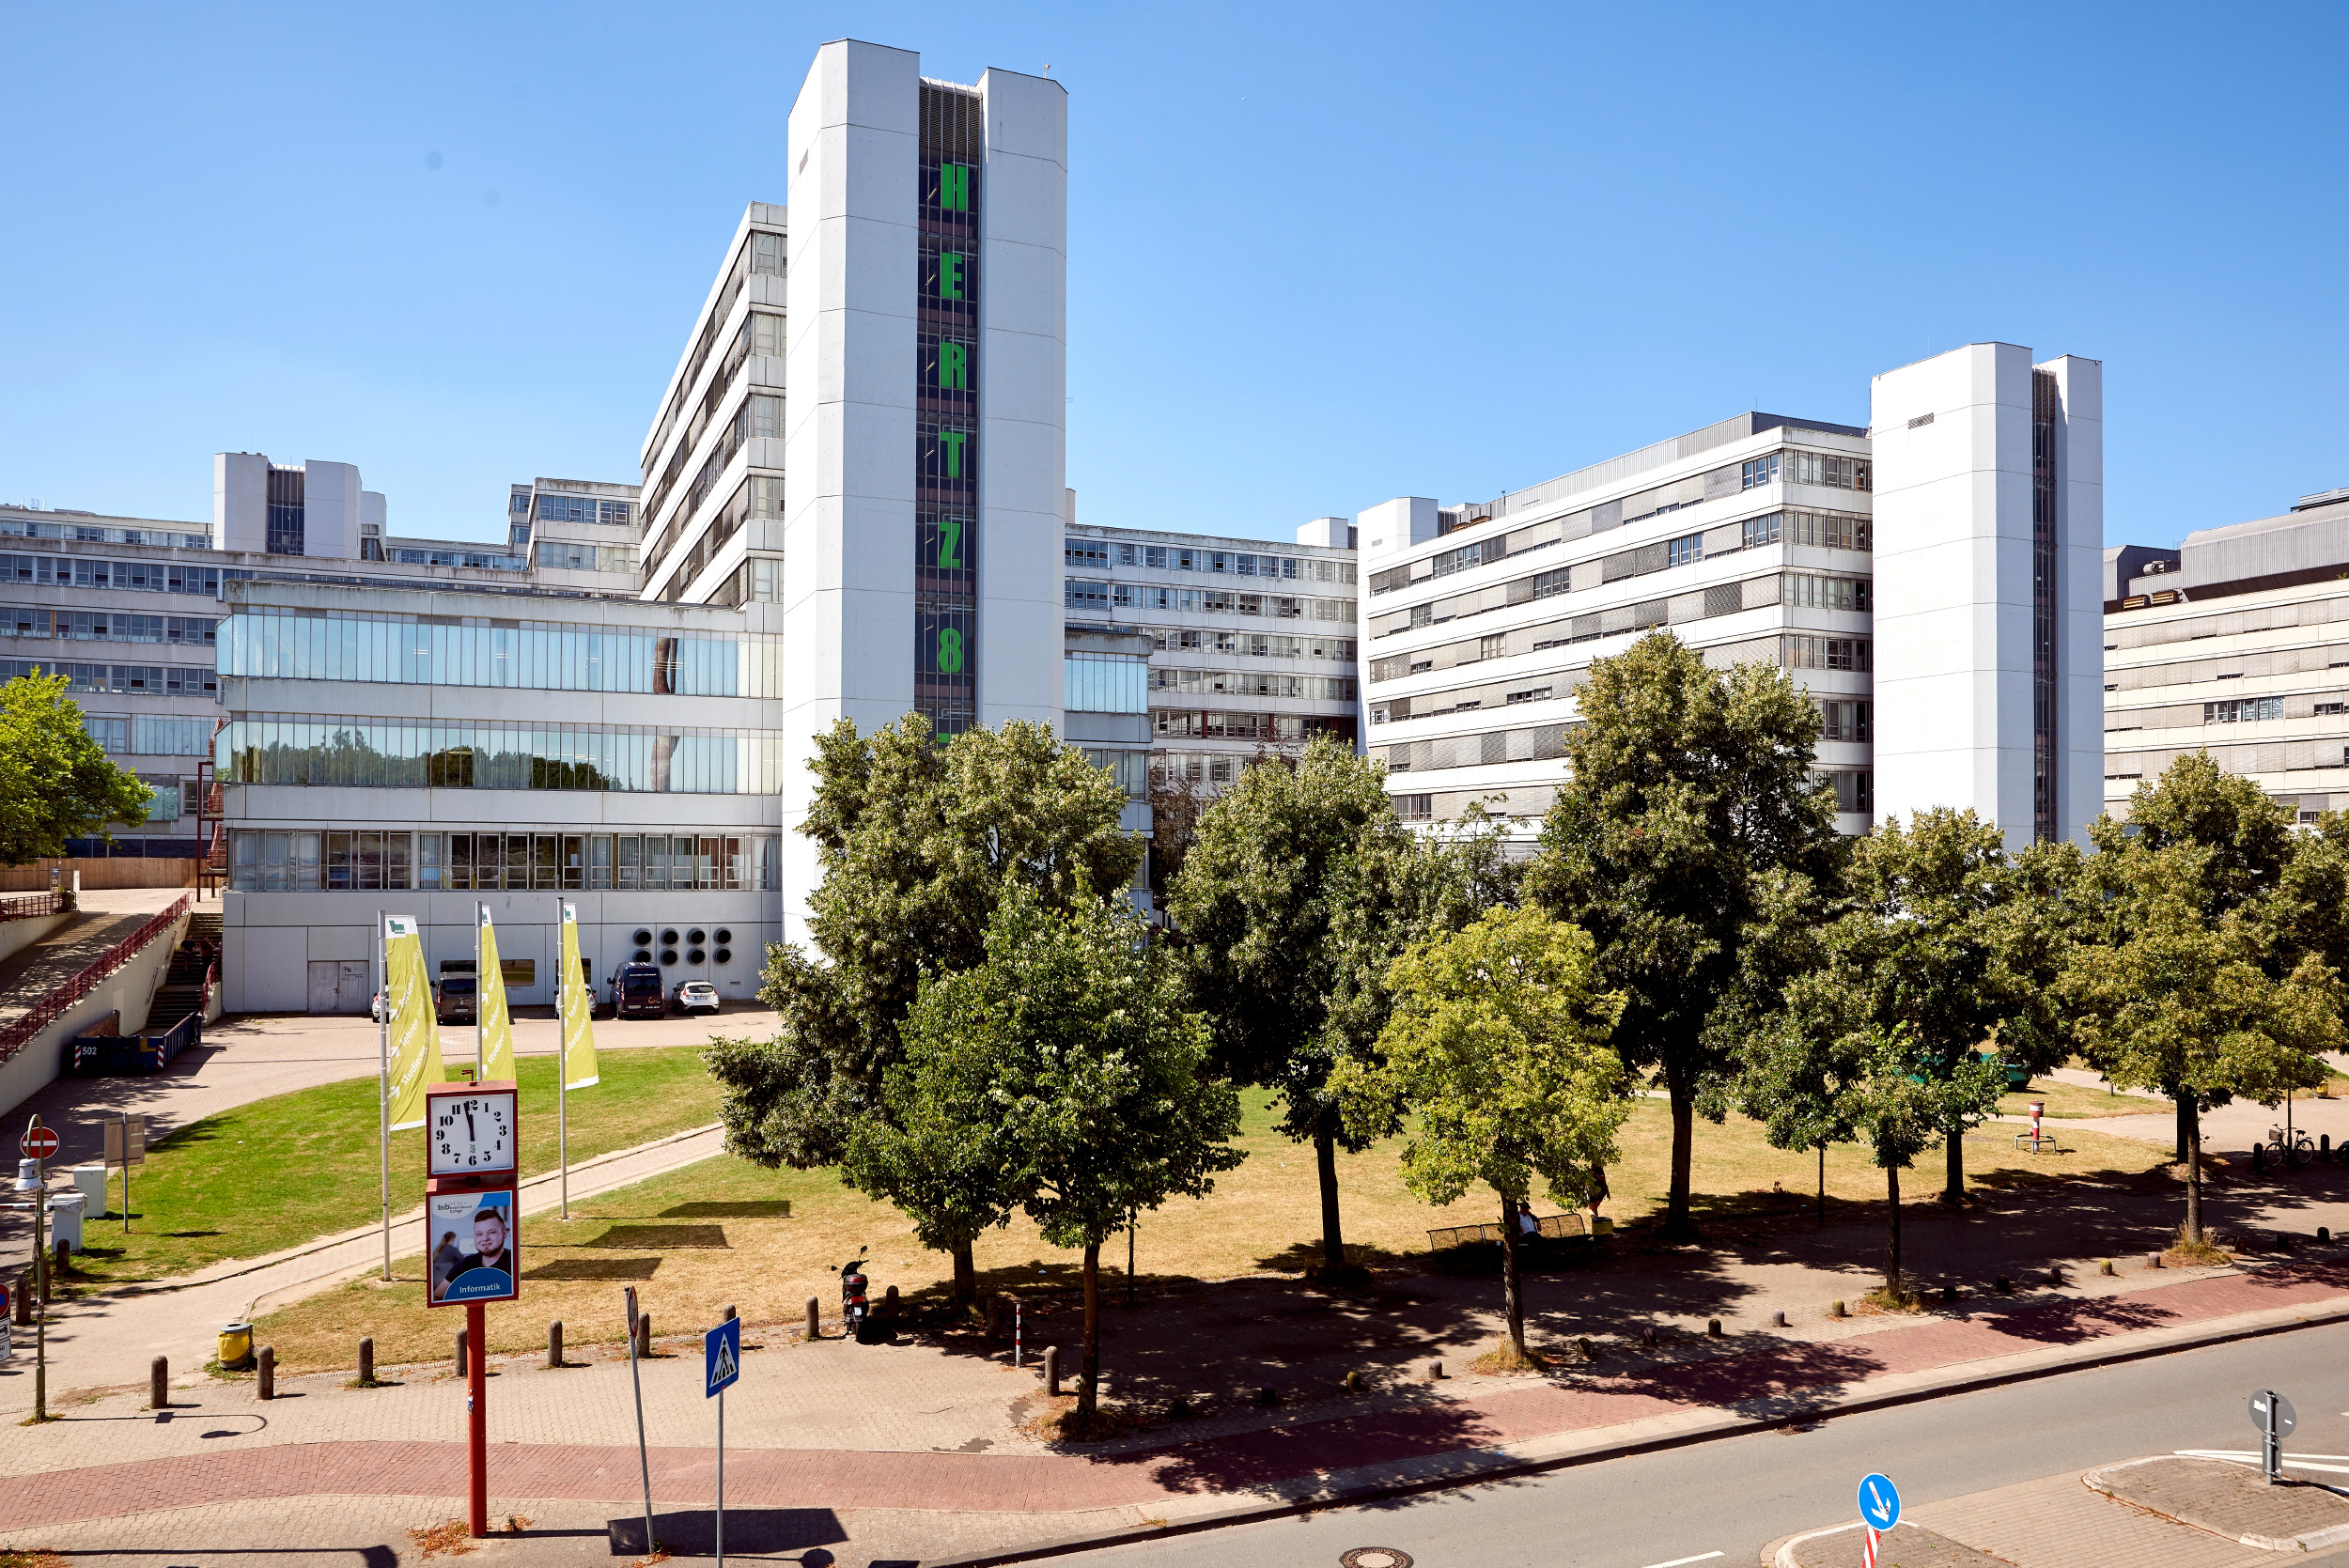 Picture of the campus of Bielefeld University